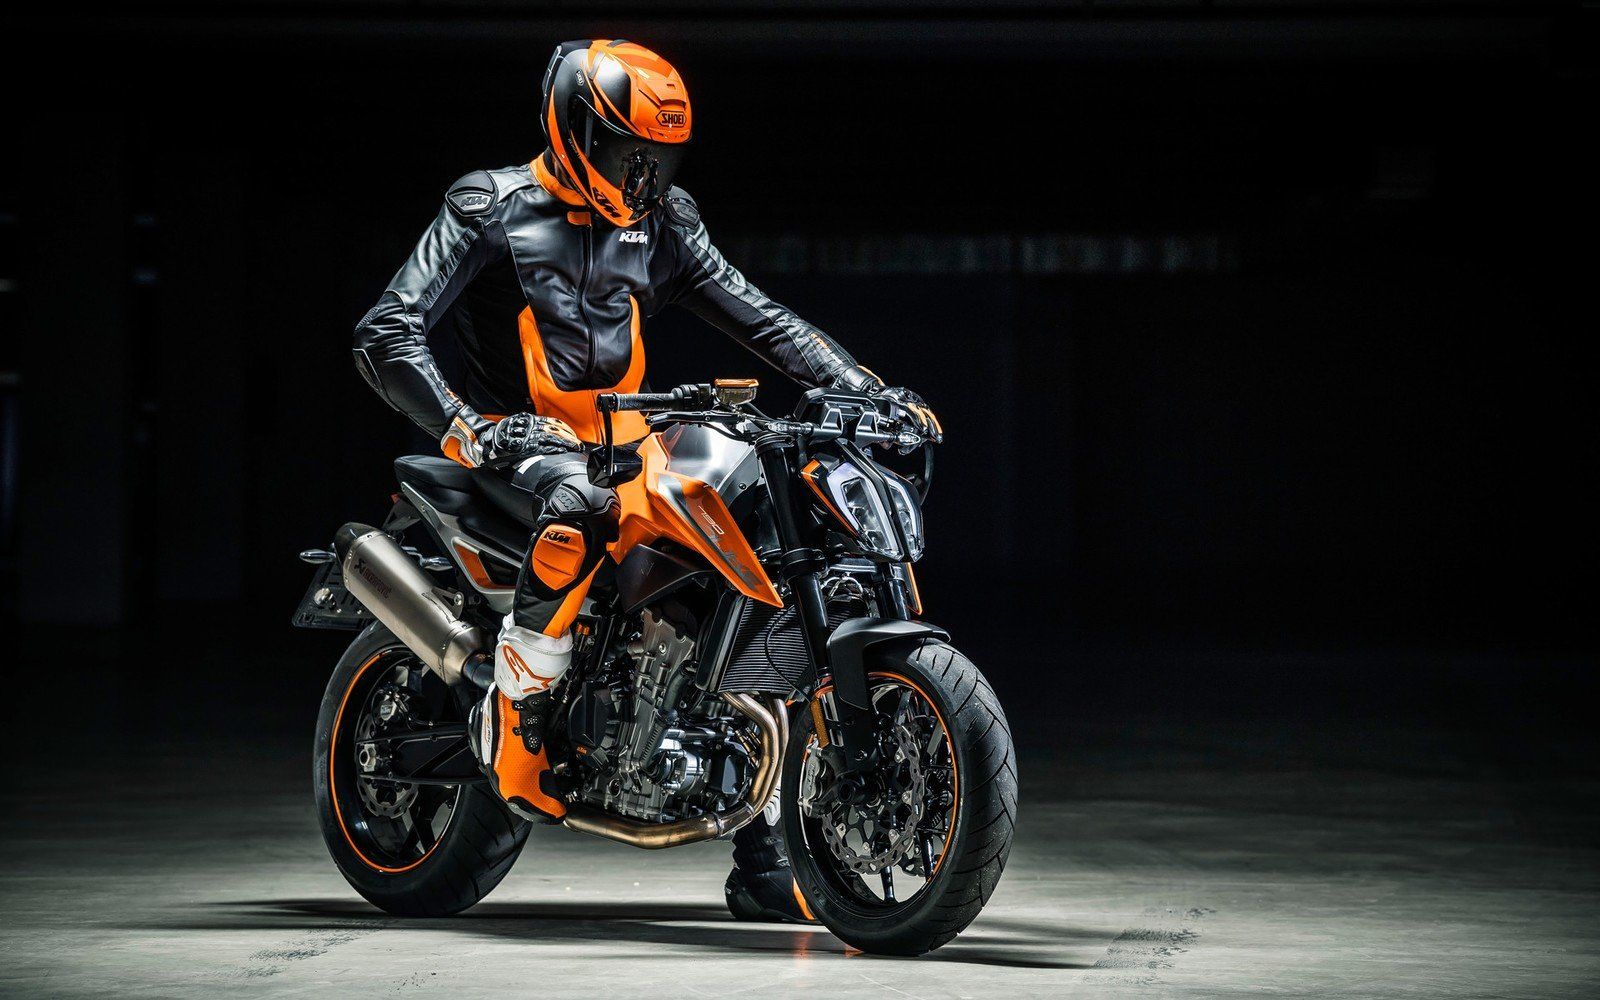 Gallery: 2018 KTM Duke 790 The Details Picture, Photo